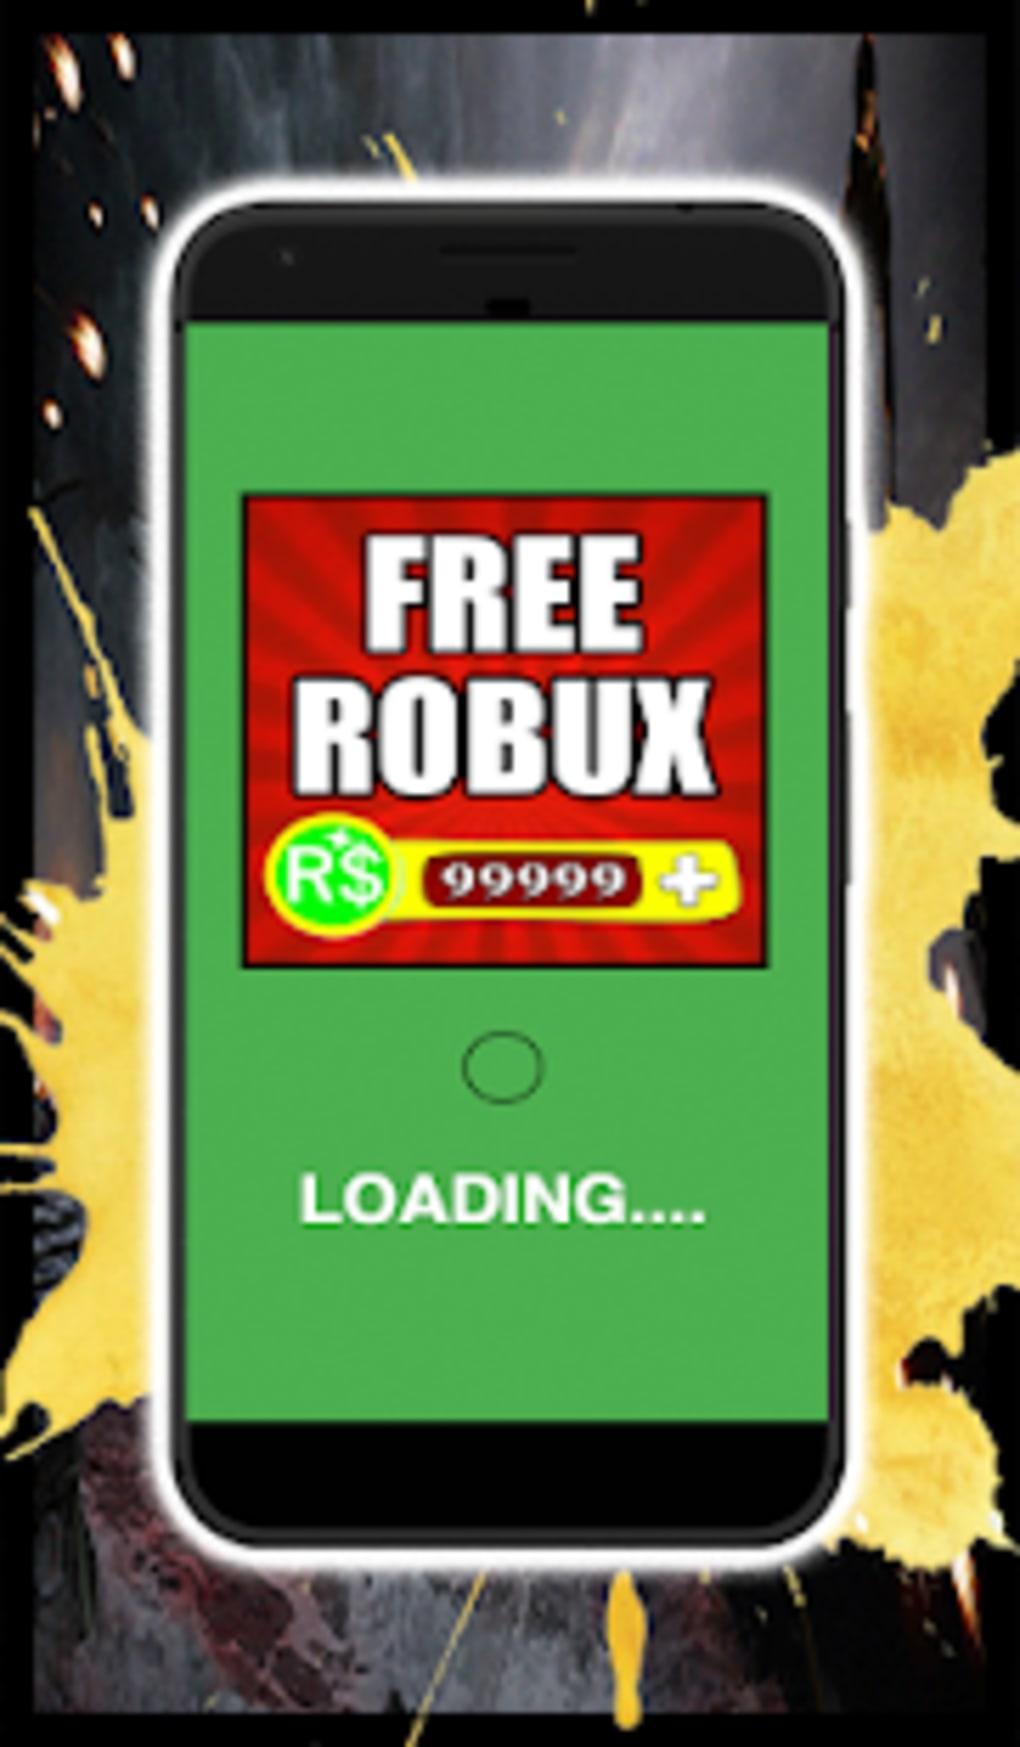 Get Free Robux Pro Tips Guide Robux Free 2k19 For Android - guide robux free 2019 get free robux pro tips apps i